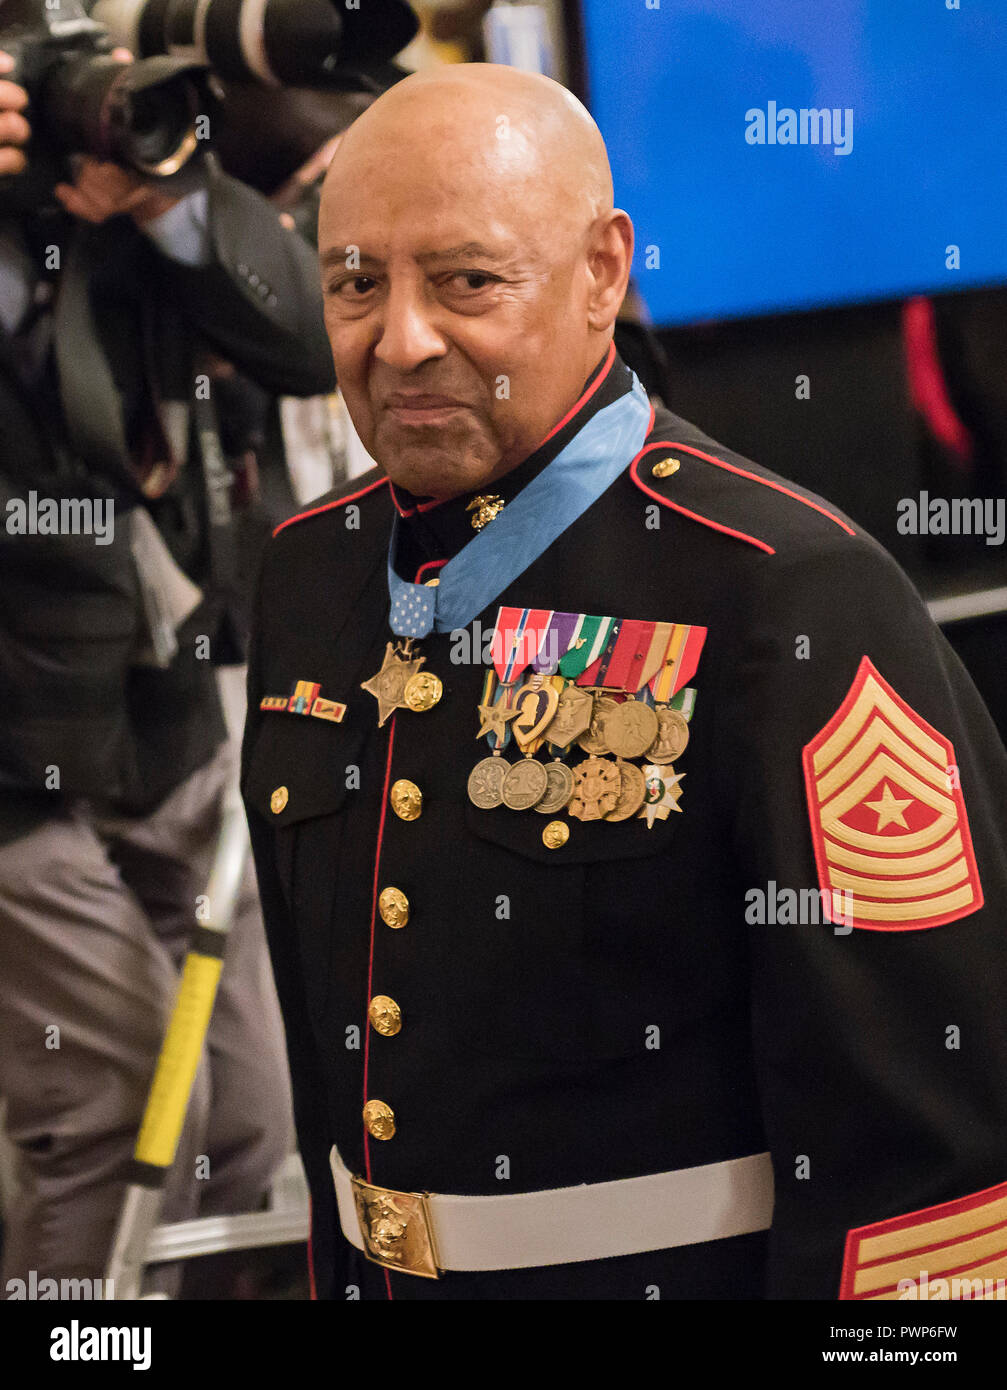 Washington, USA. 17th Oct 2018. Sergeant Major John L. Canley, United States Marine Corps (Retired) departs following the ceremony where US President Donald J. Trump awarded him the Medal of Honor for conspicuous gallantry during the Vietnam War in a ceremony in the East Room of the the White House in Washington, DC on Wednesday, October 17, 2018. Credit: Ron Sachs/CNP/MediaPunch Credit: MediaPunch Inc/Alamy Live News Stock Photo